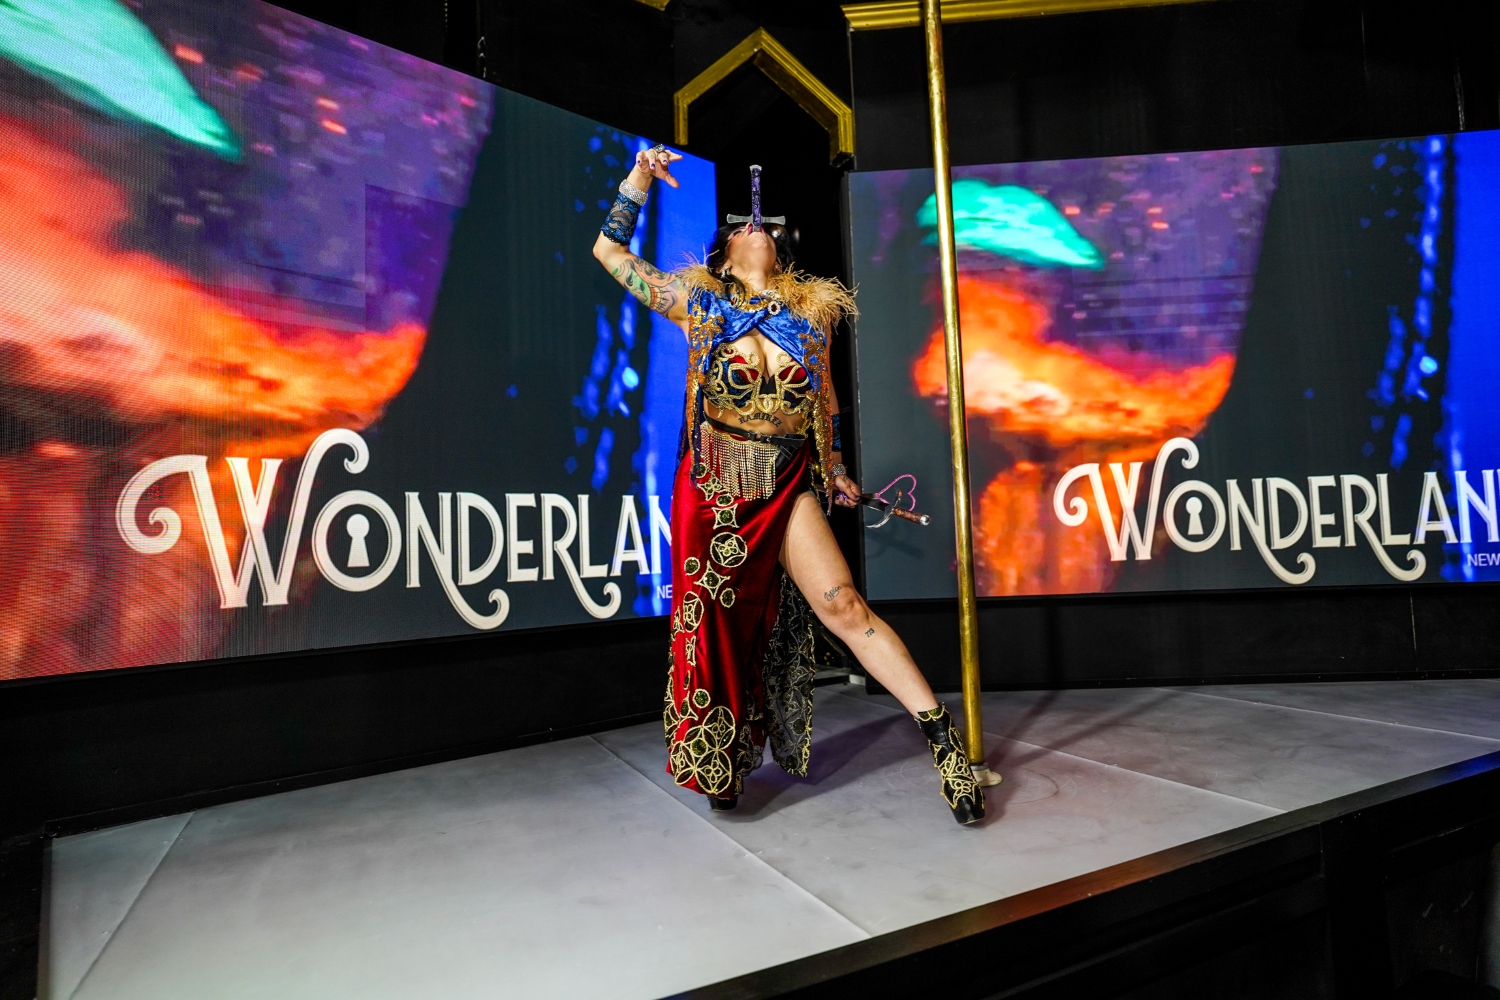 La Reine The Thrill Making Sword Swallowing Look Easy on Stage at Wonderland in NYC